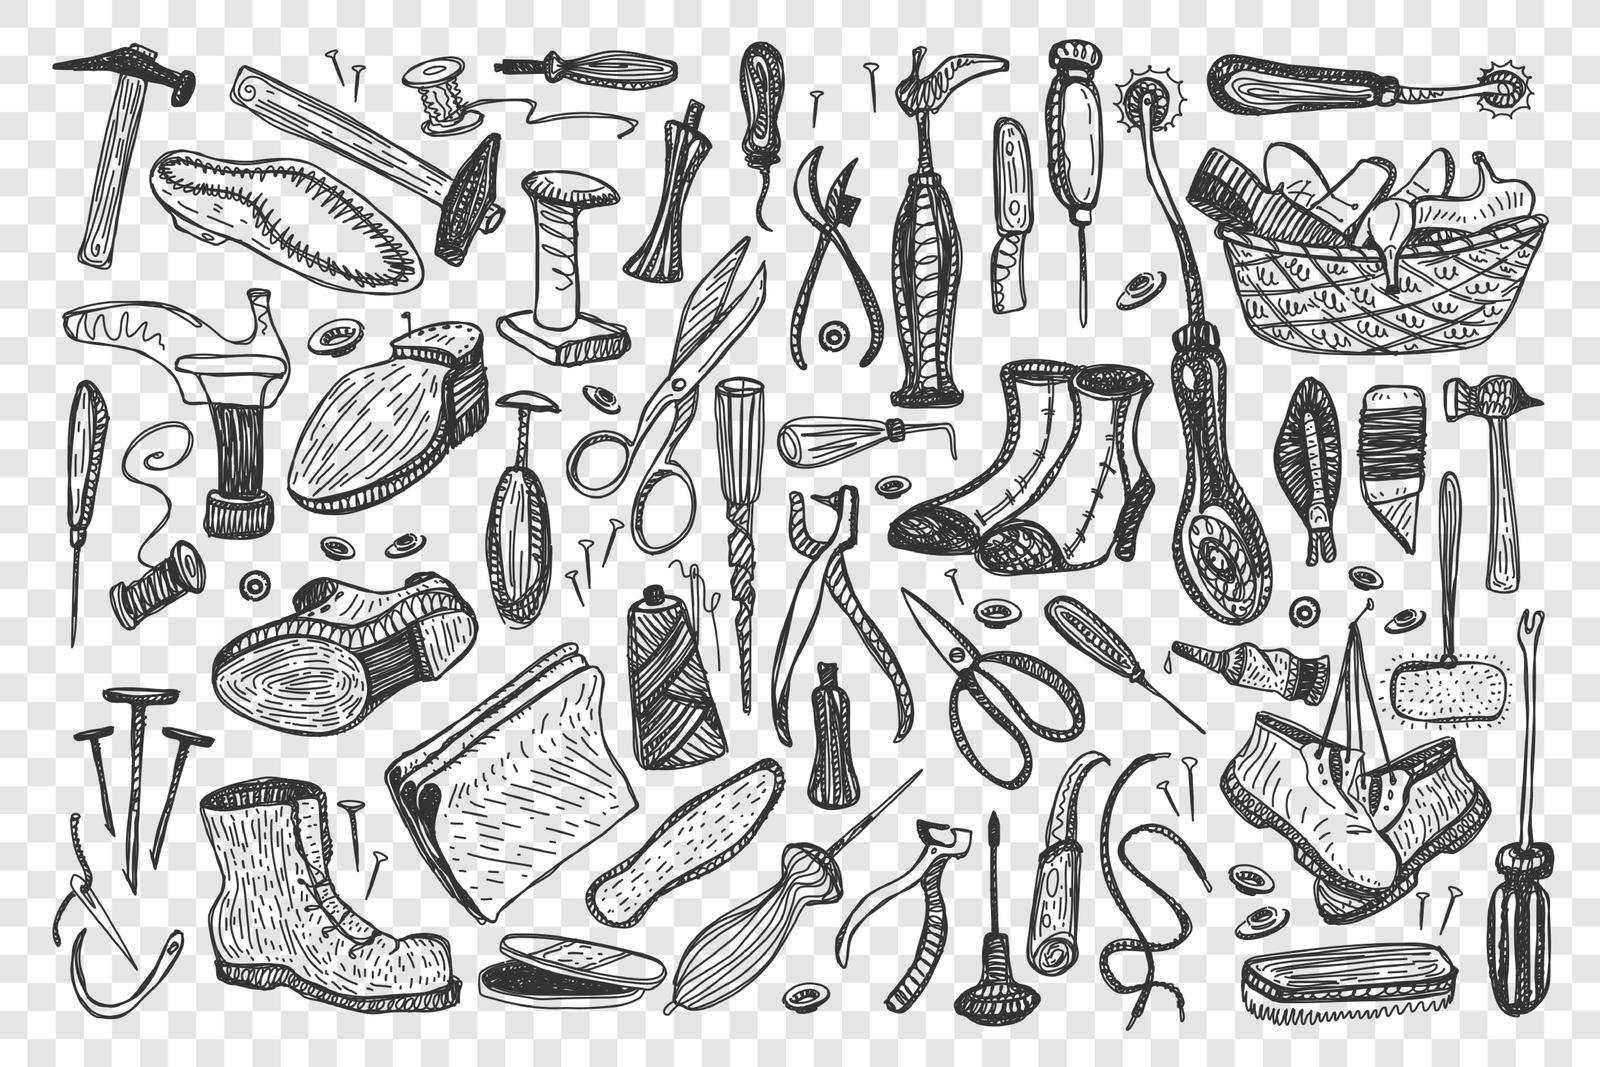 Shoemaking doodle set. Collection of male female boots repair tailoring atelier instruments isolated on transparent background. Handcrafting fashionable fabric footwear workshop equipment illustration